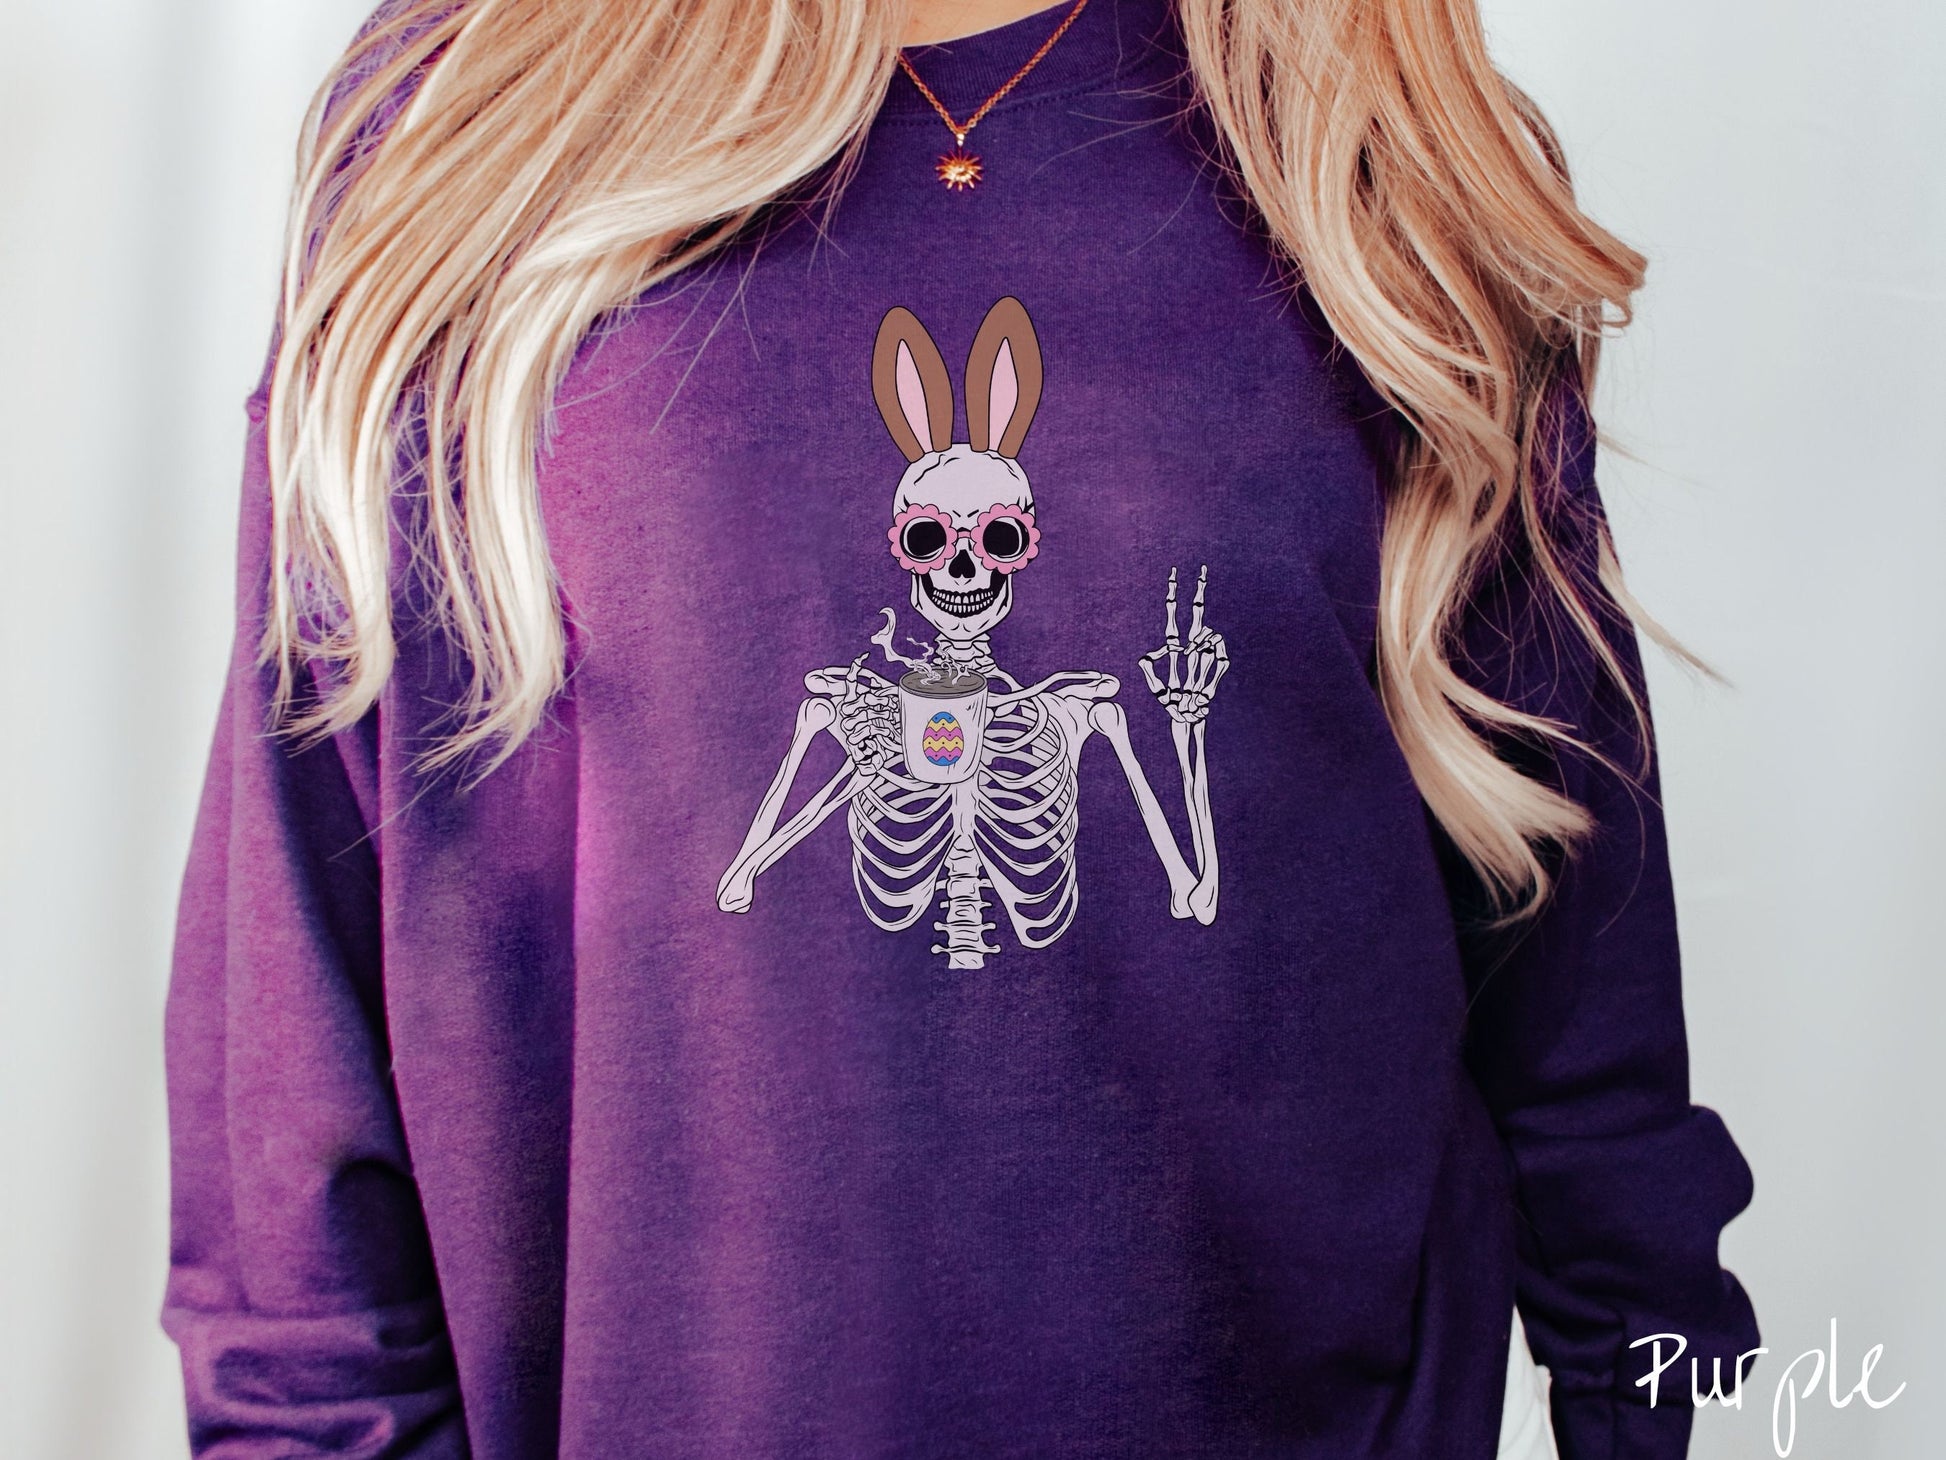 A woman wearing a cute, vintage purple colored sweatshirt with a pink-toned skeleton wearing pink glasses and brown bunny ears, holding a cup of coffee and holding up a peace sign with the other hand. The white coffee cup has a colorful Easter egg.